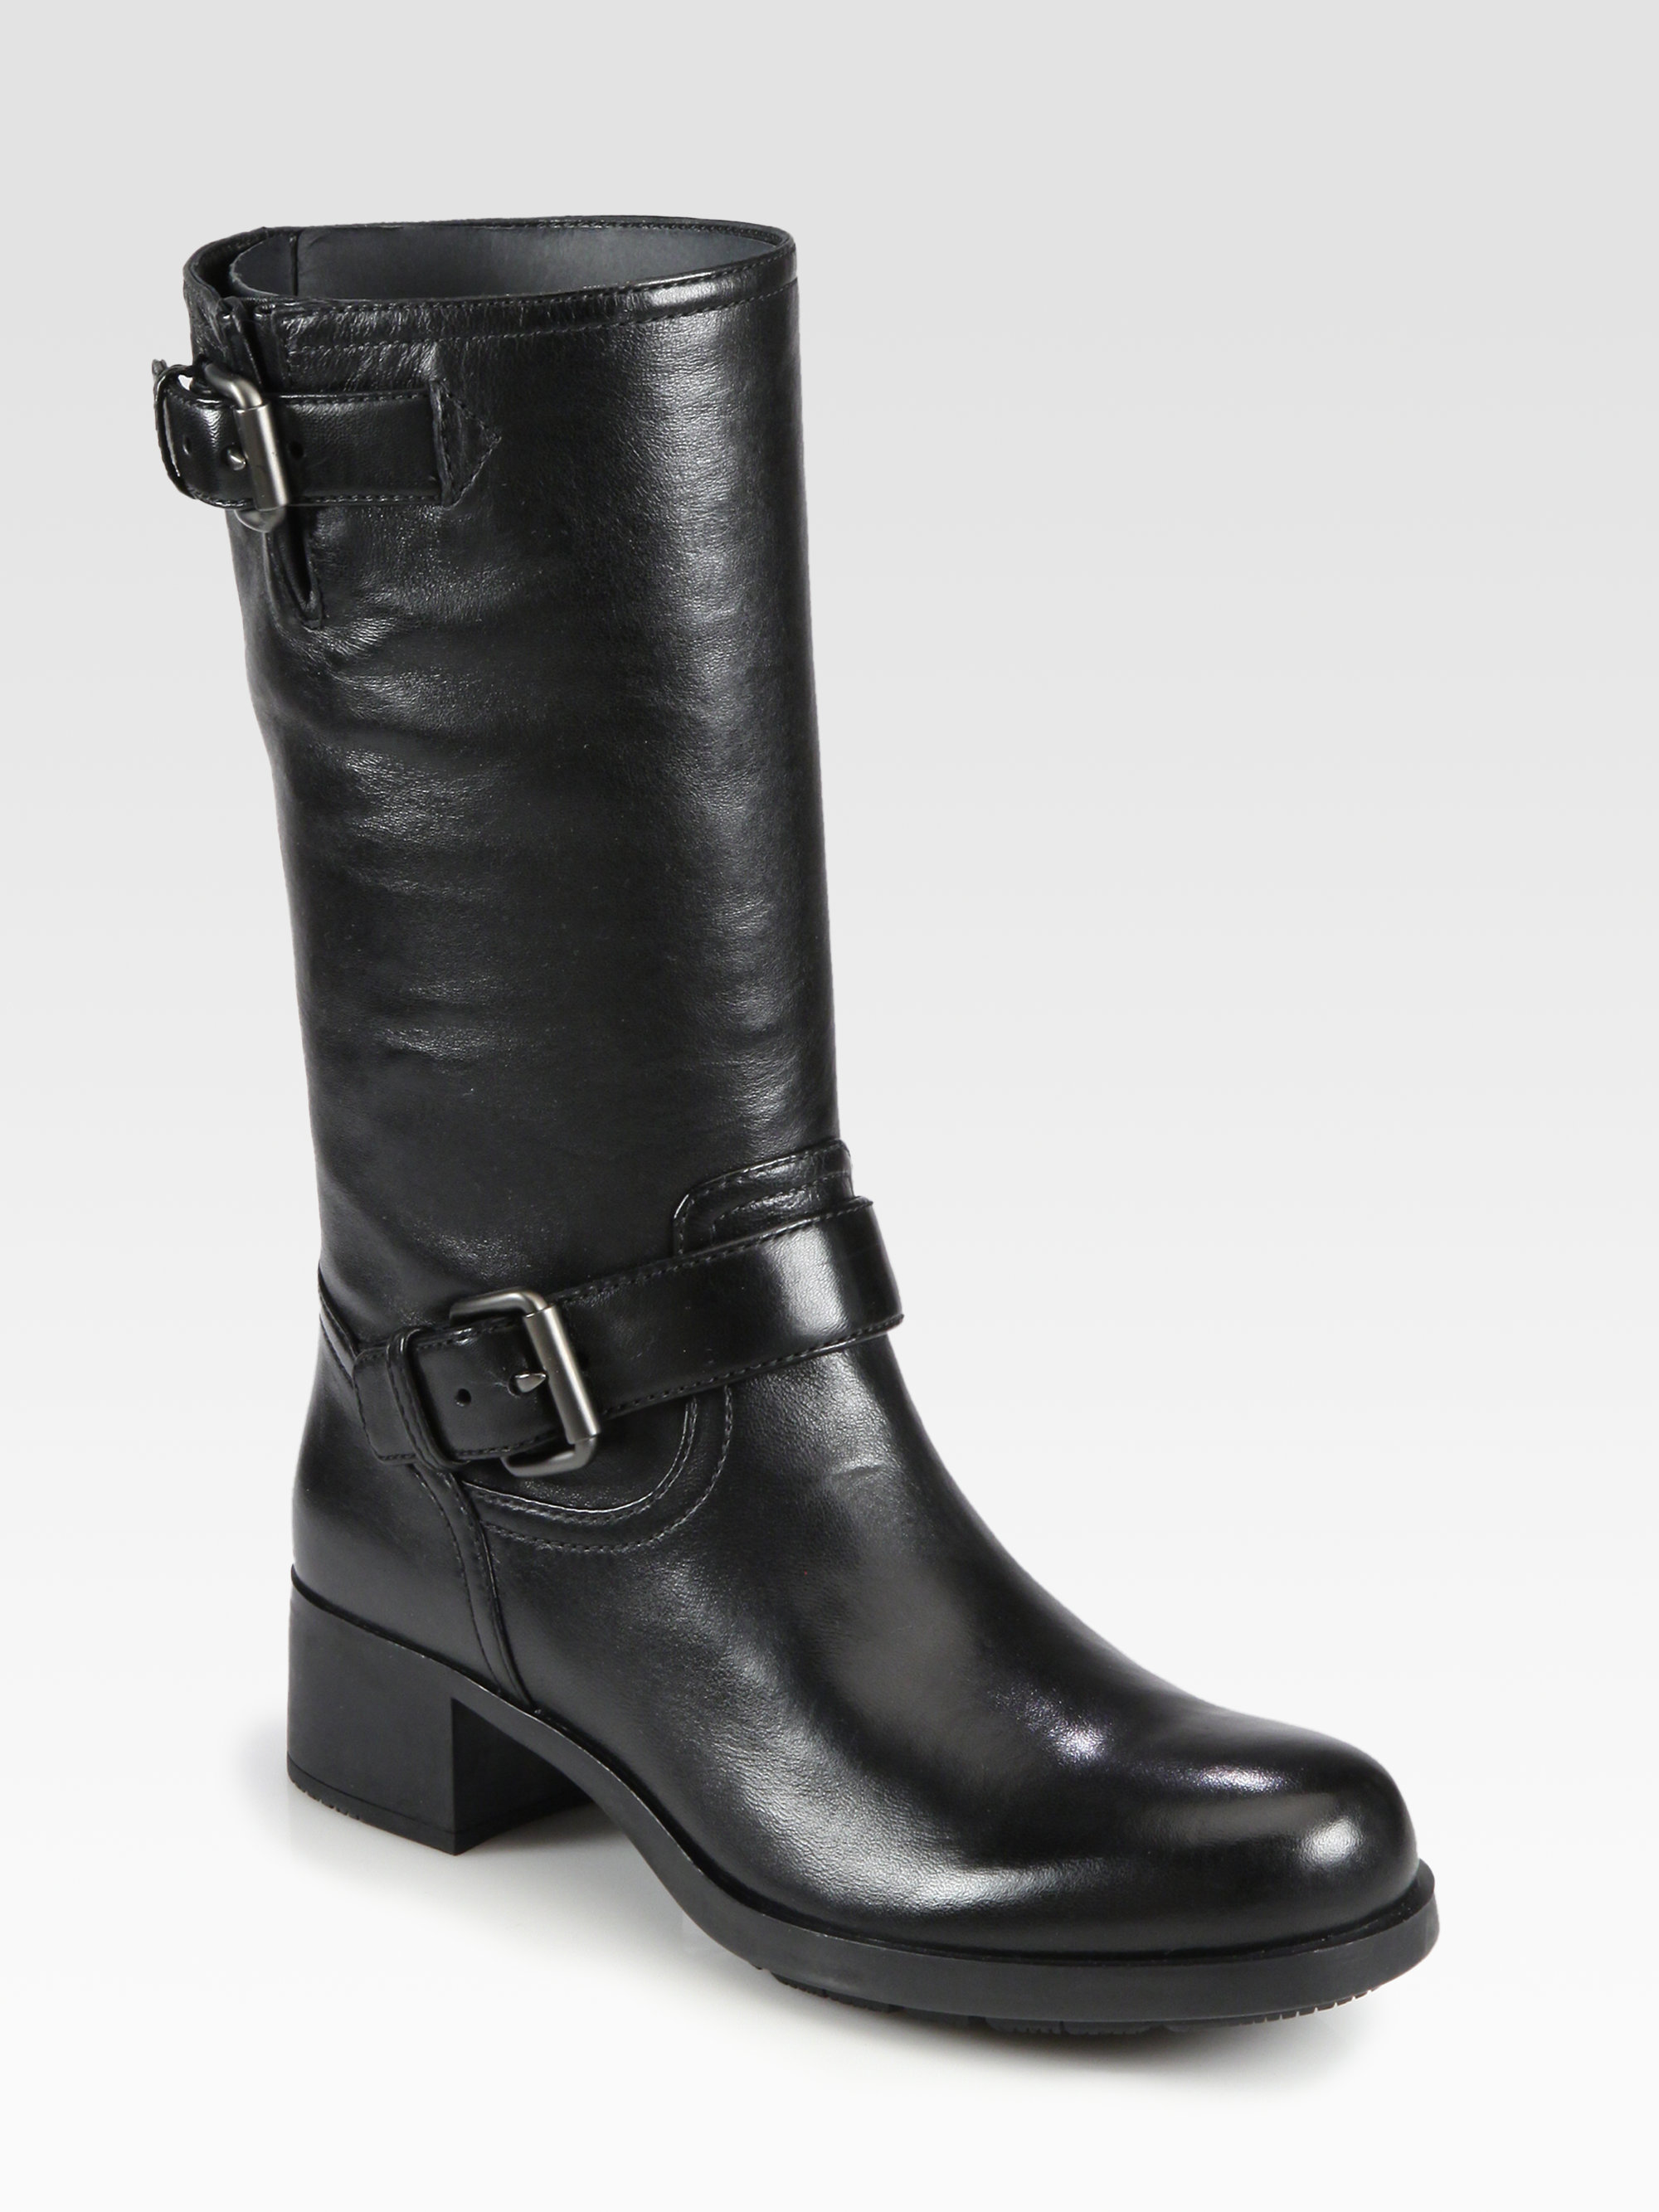 Prada Leather Motorcycle Boots in Black | Lyst